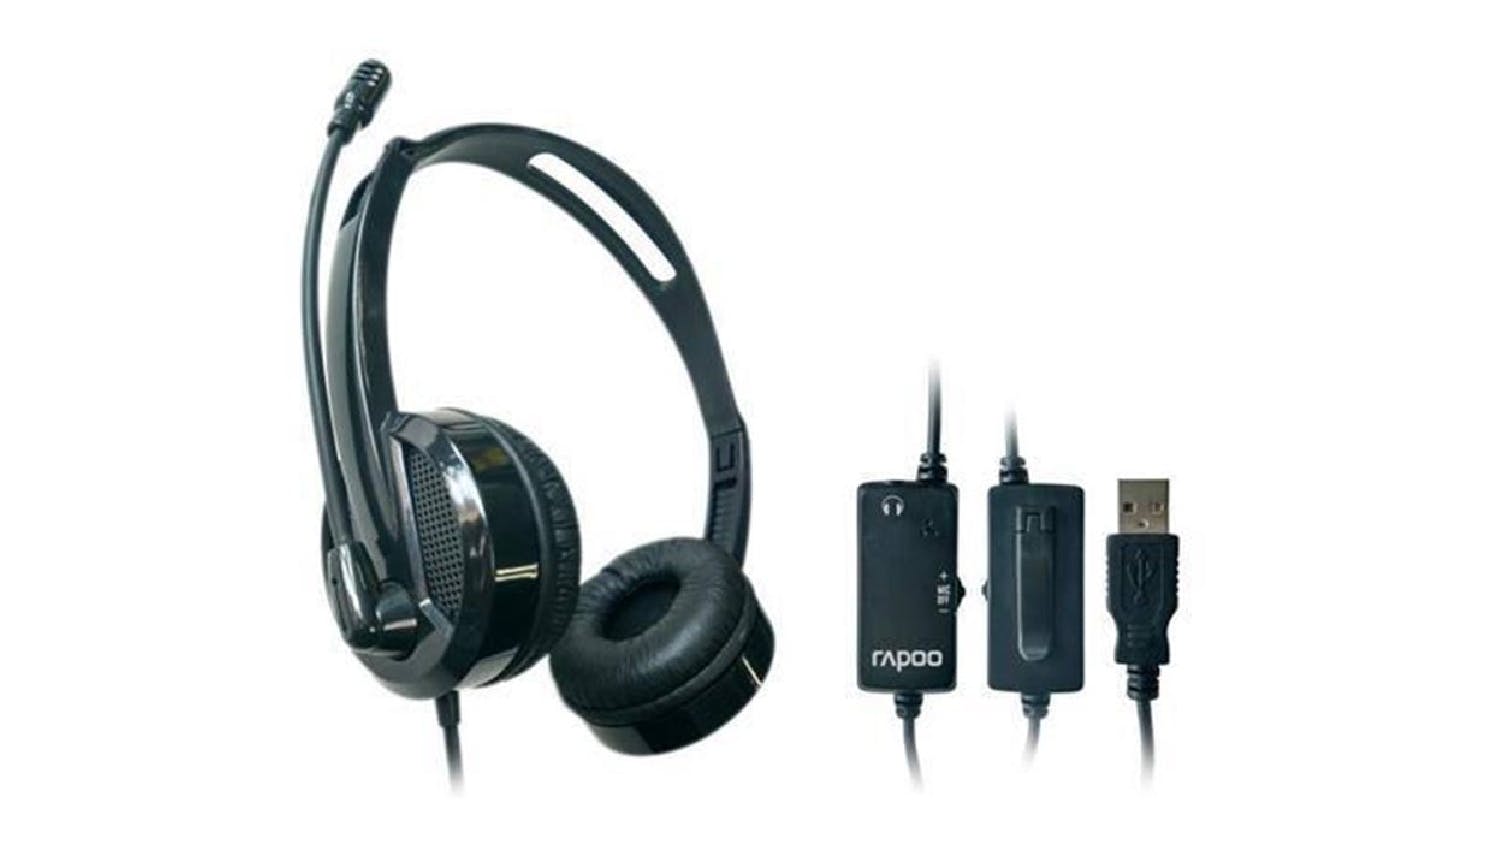 Rapoo H120 USB Wired Stereo Headset - Black